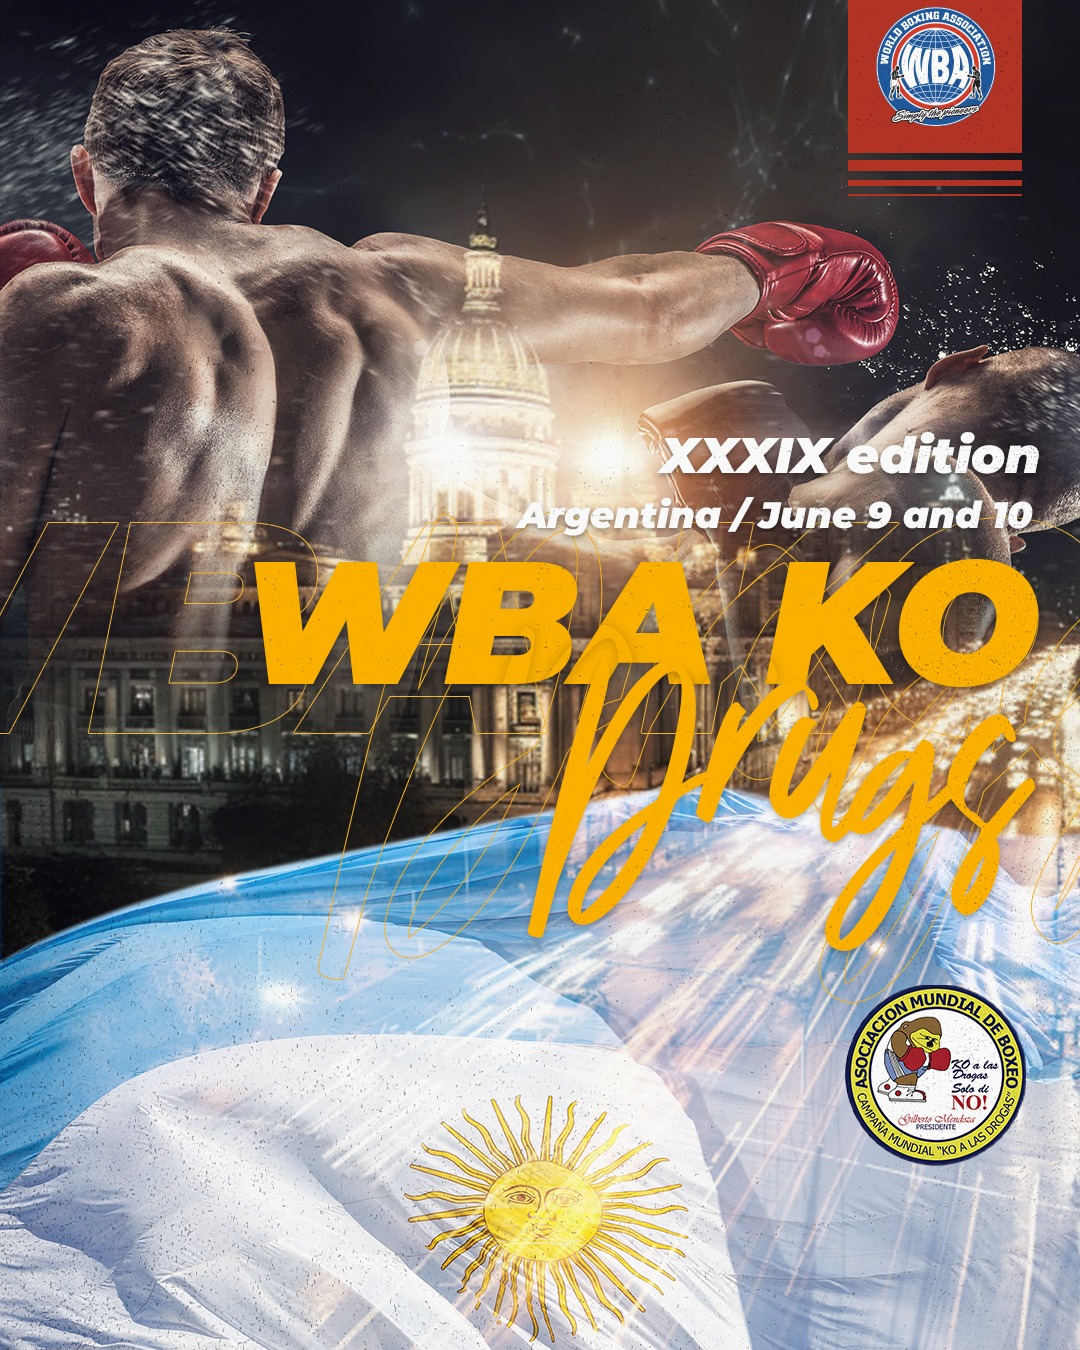 Great fights are expected at KO Drugs in Argentina